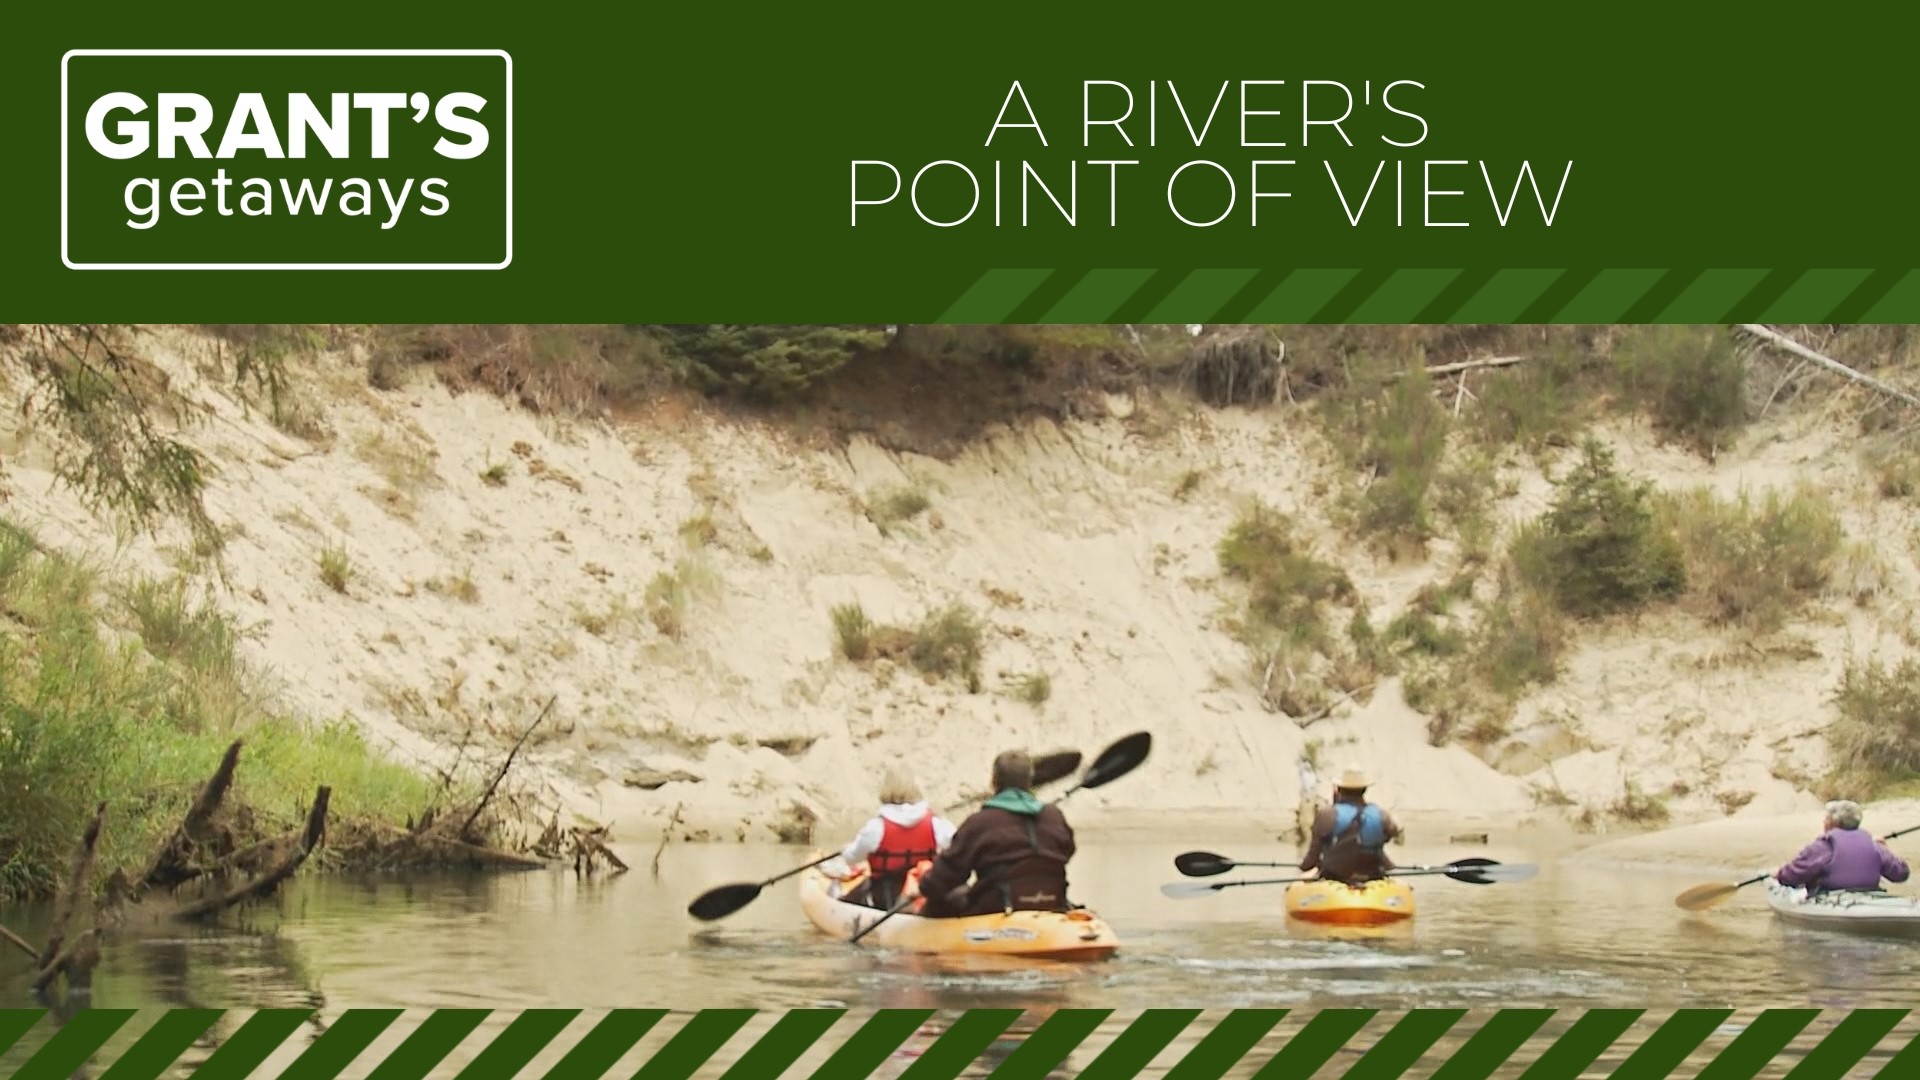 The Siltcoos River Canoe Trail cuts through the heart of the Oregon Dunes, providing a 3-mile paddle through sandbanks and nesting shorebirds.